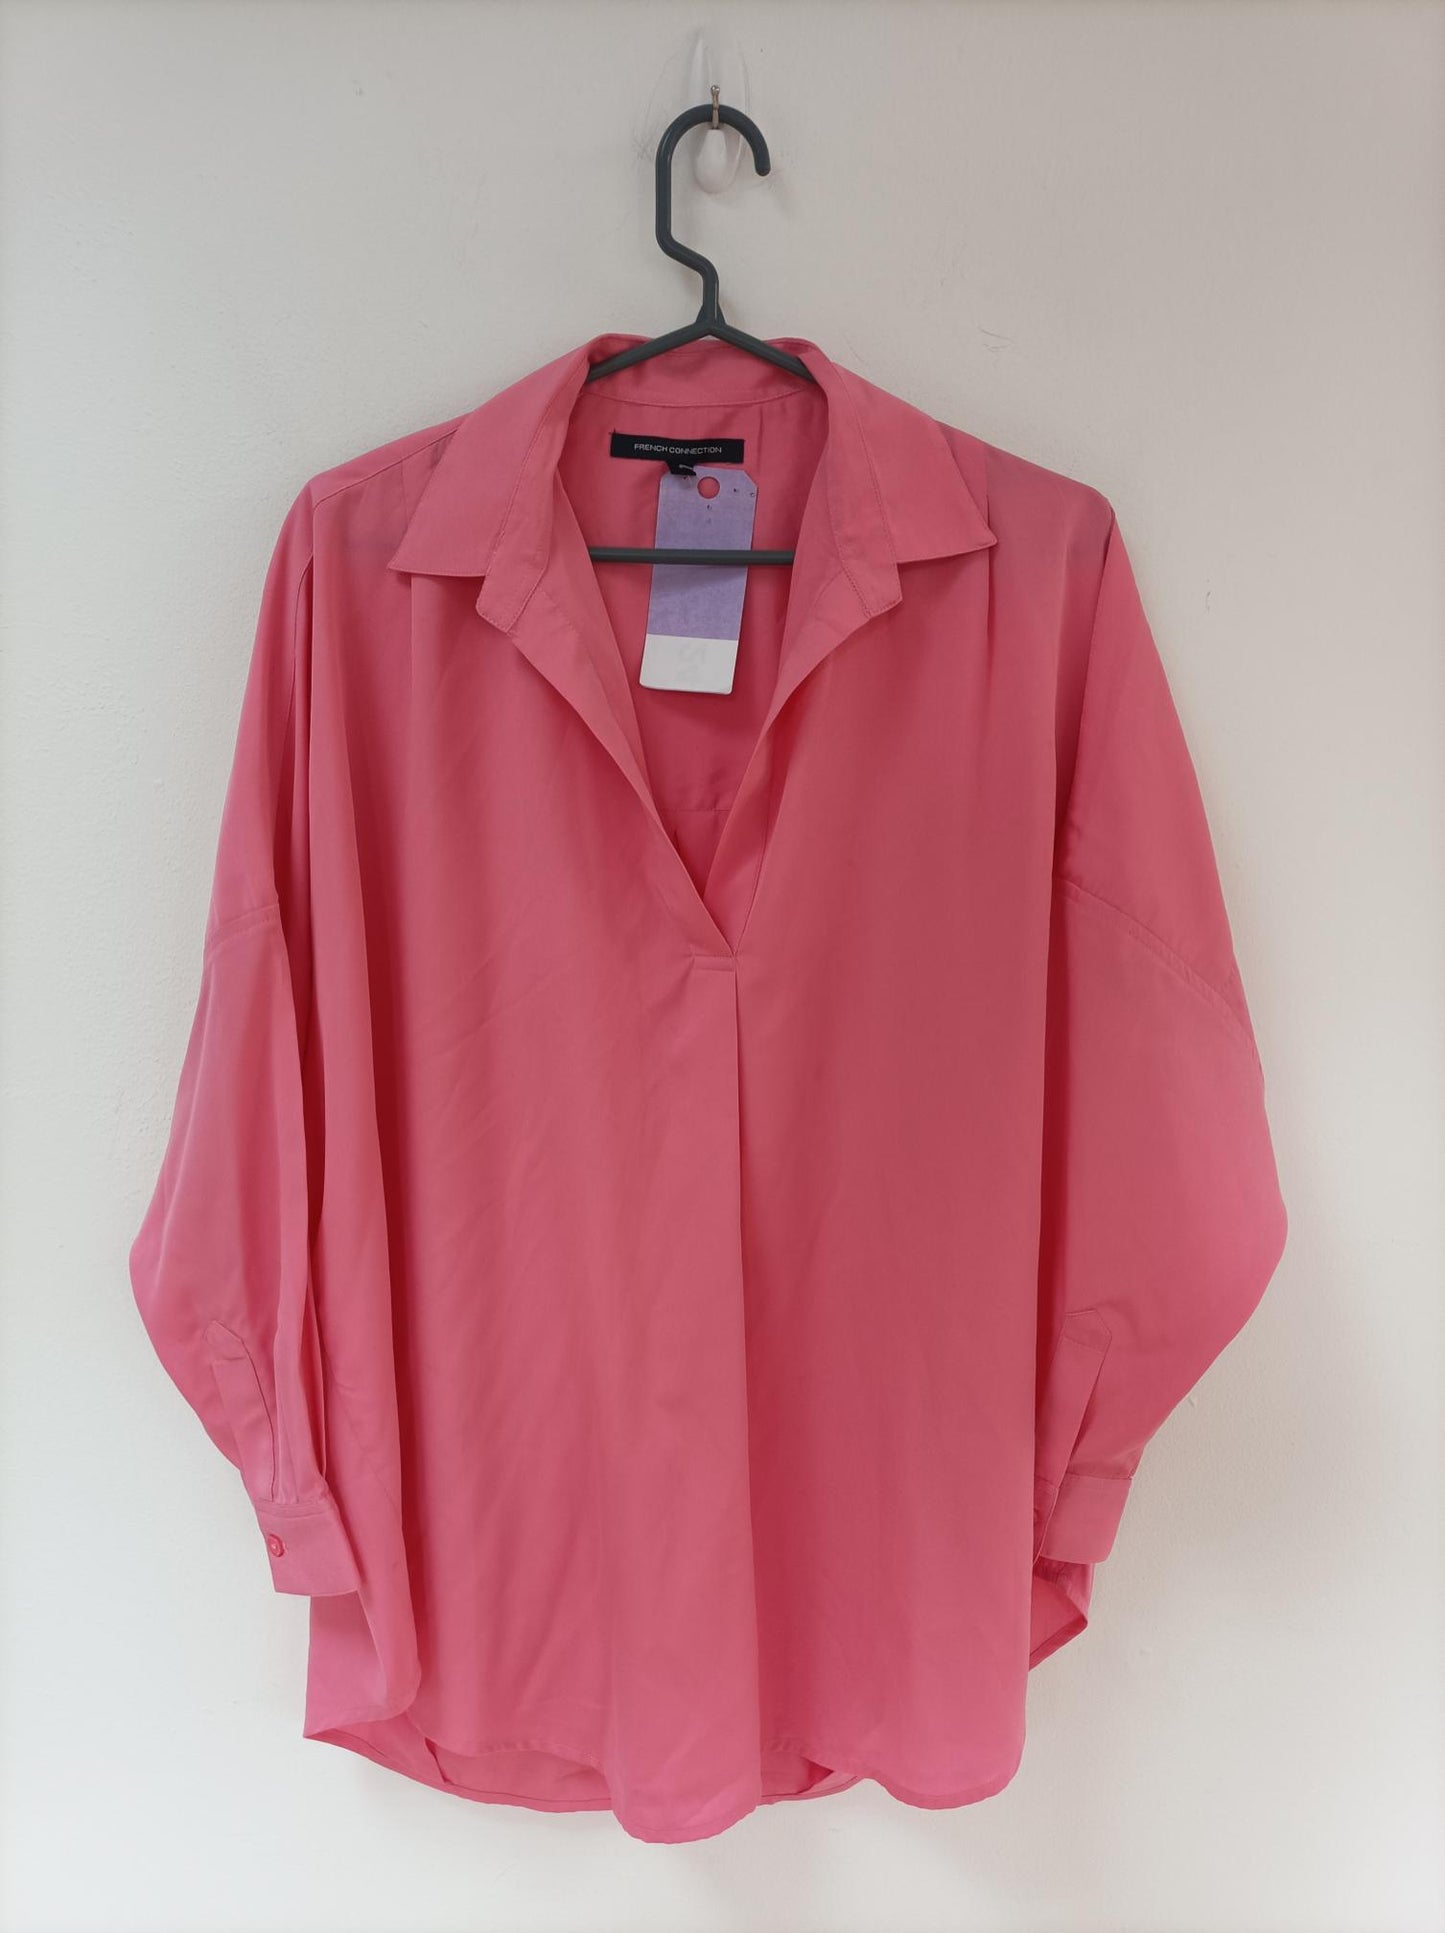 Bright pink blouse, French Connection, size 20/22 - Damaged Item Sale